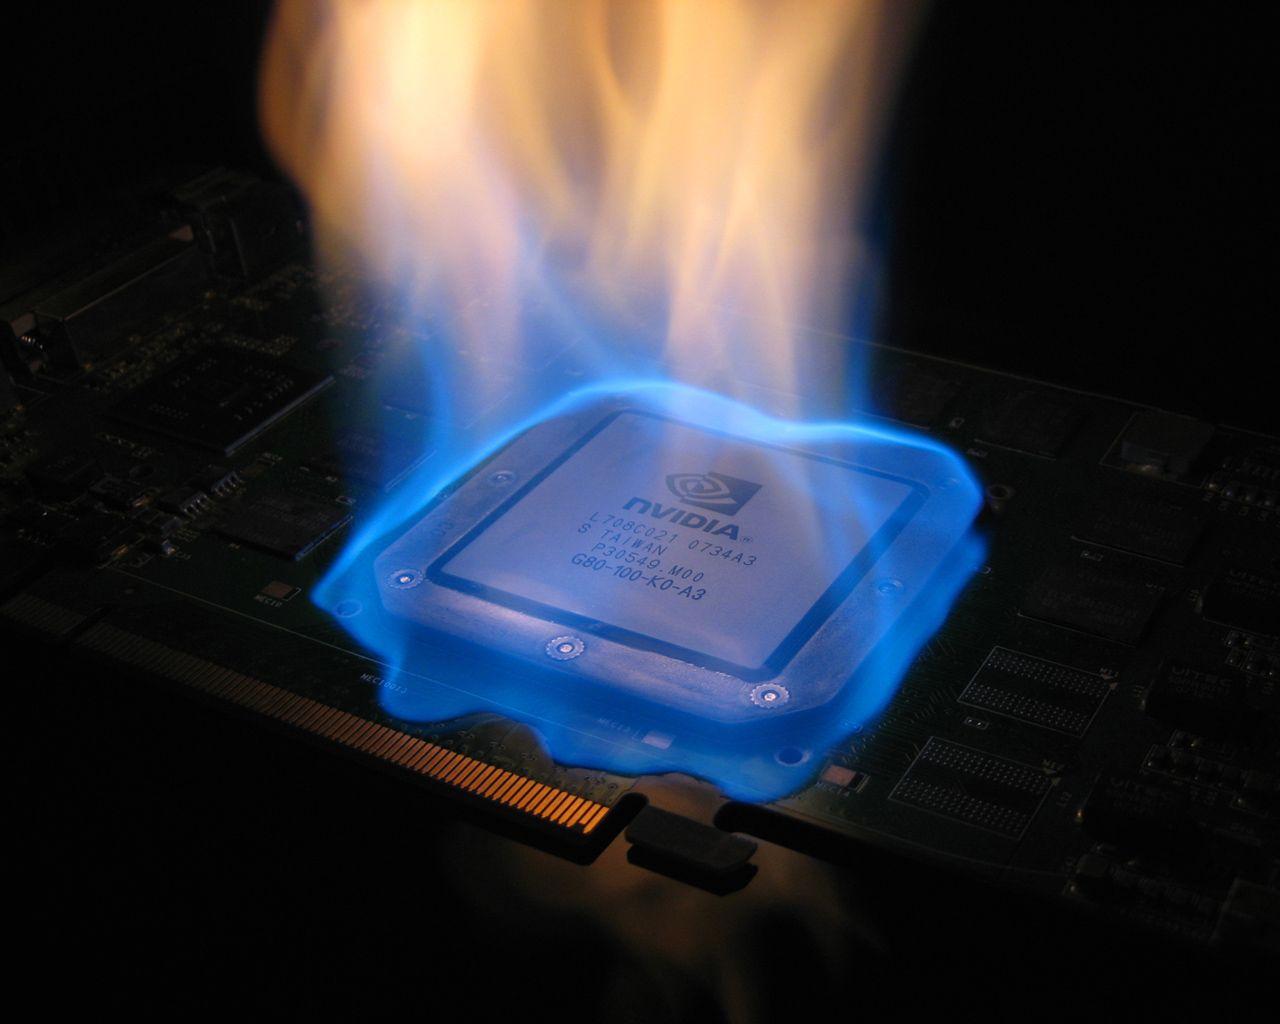 NVidia chipset on fire